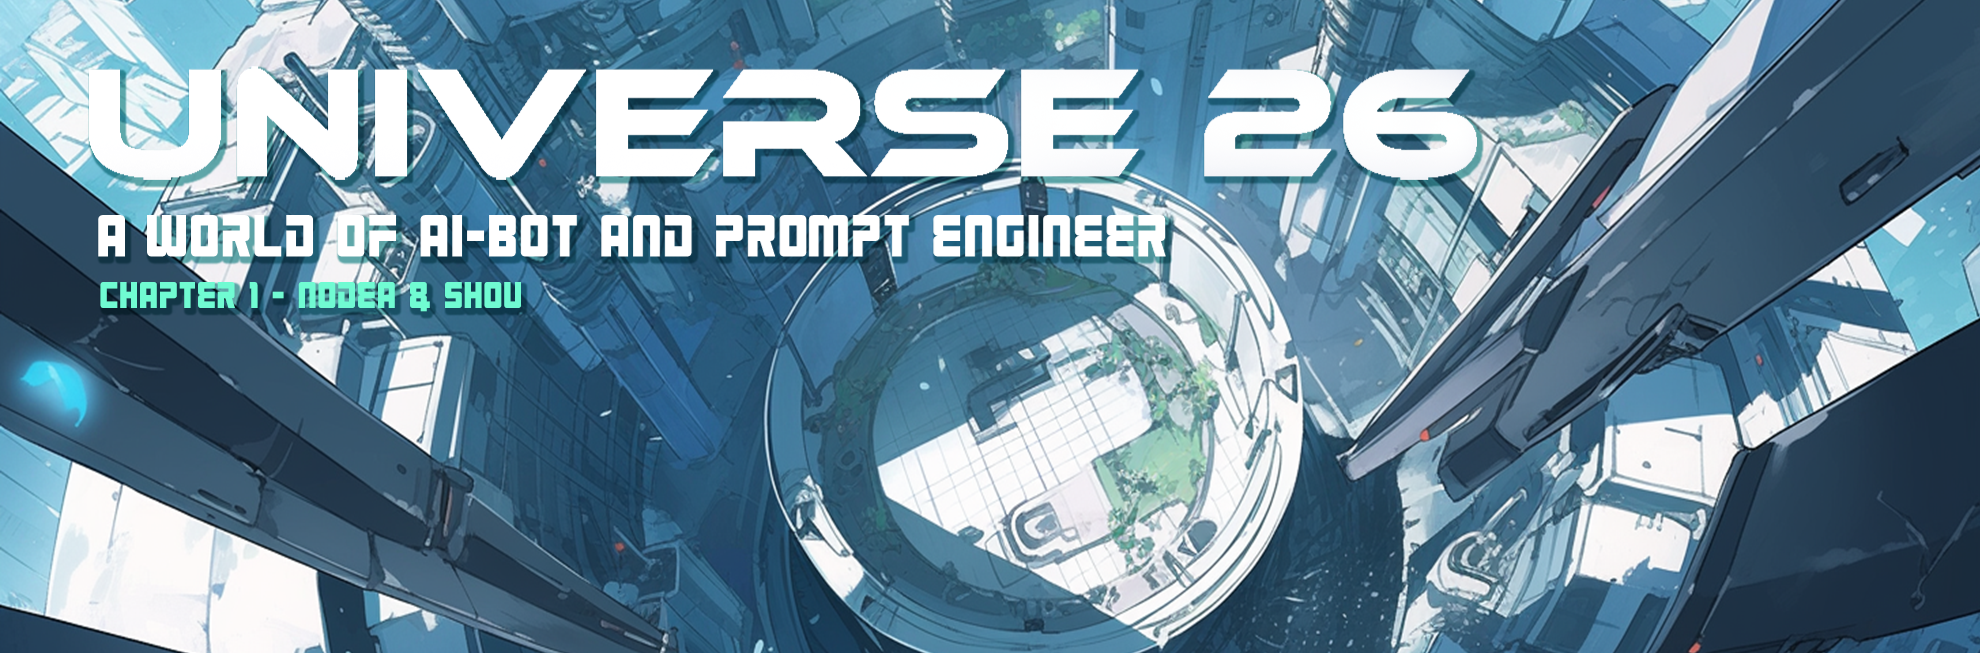 Universe 26 - A World of AI-Bot and Prompt Engineer